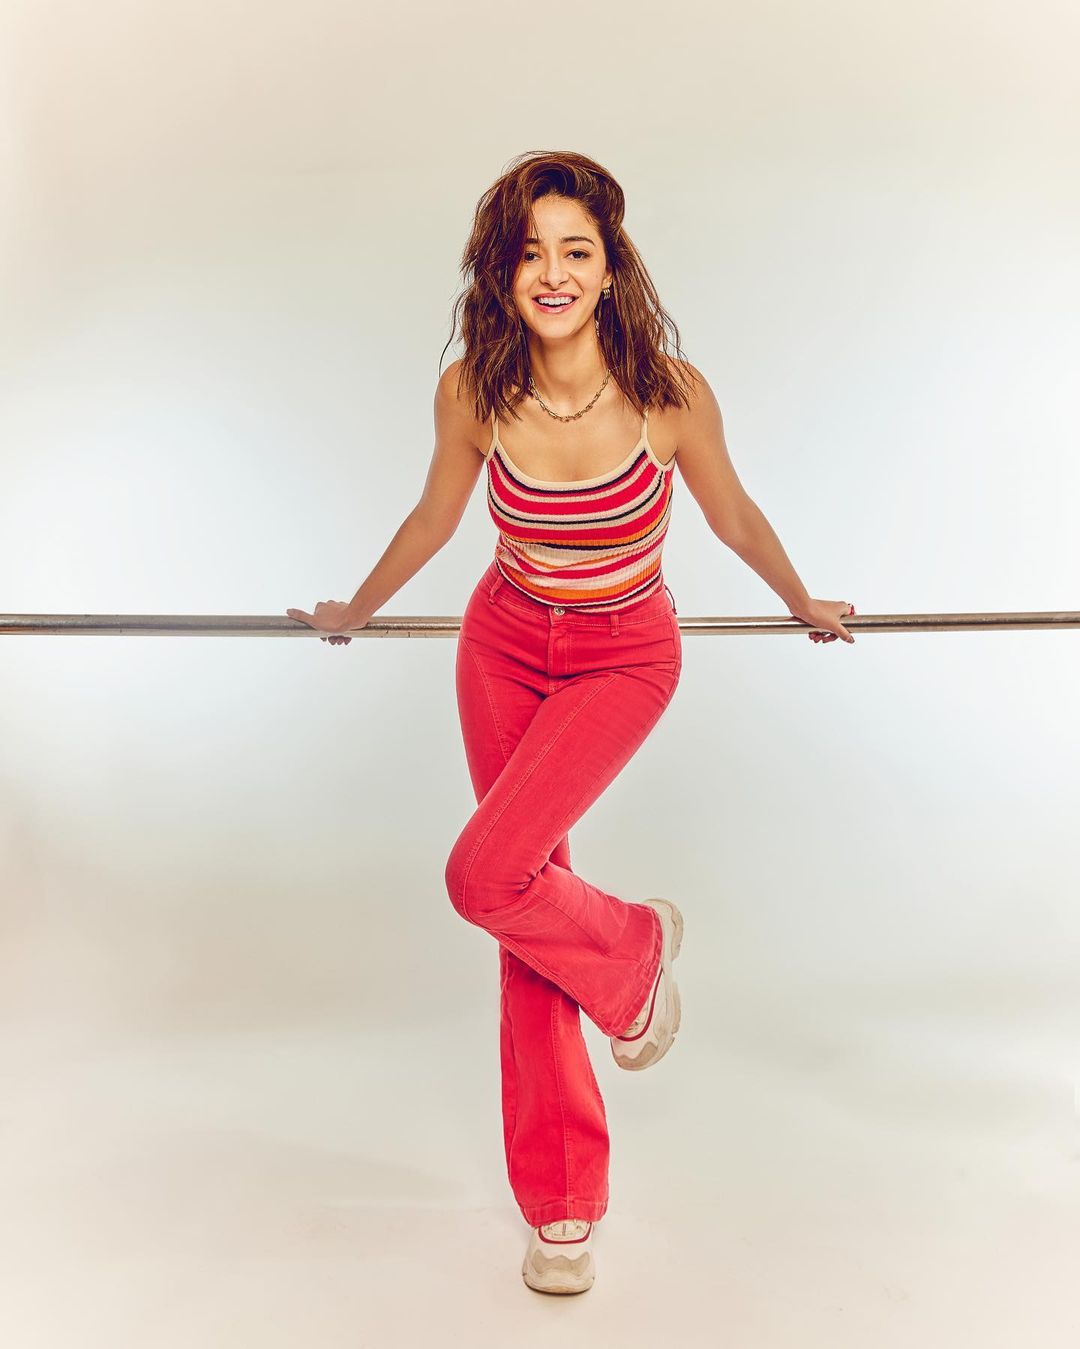 Ananya Panday seen in Colorful Top and Red Denim during Photoshoot 1